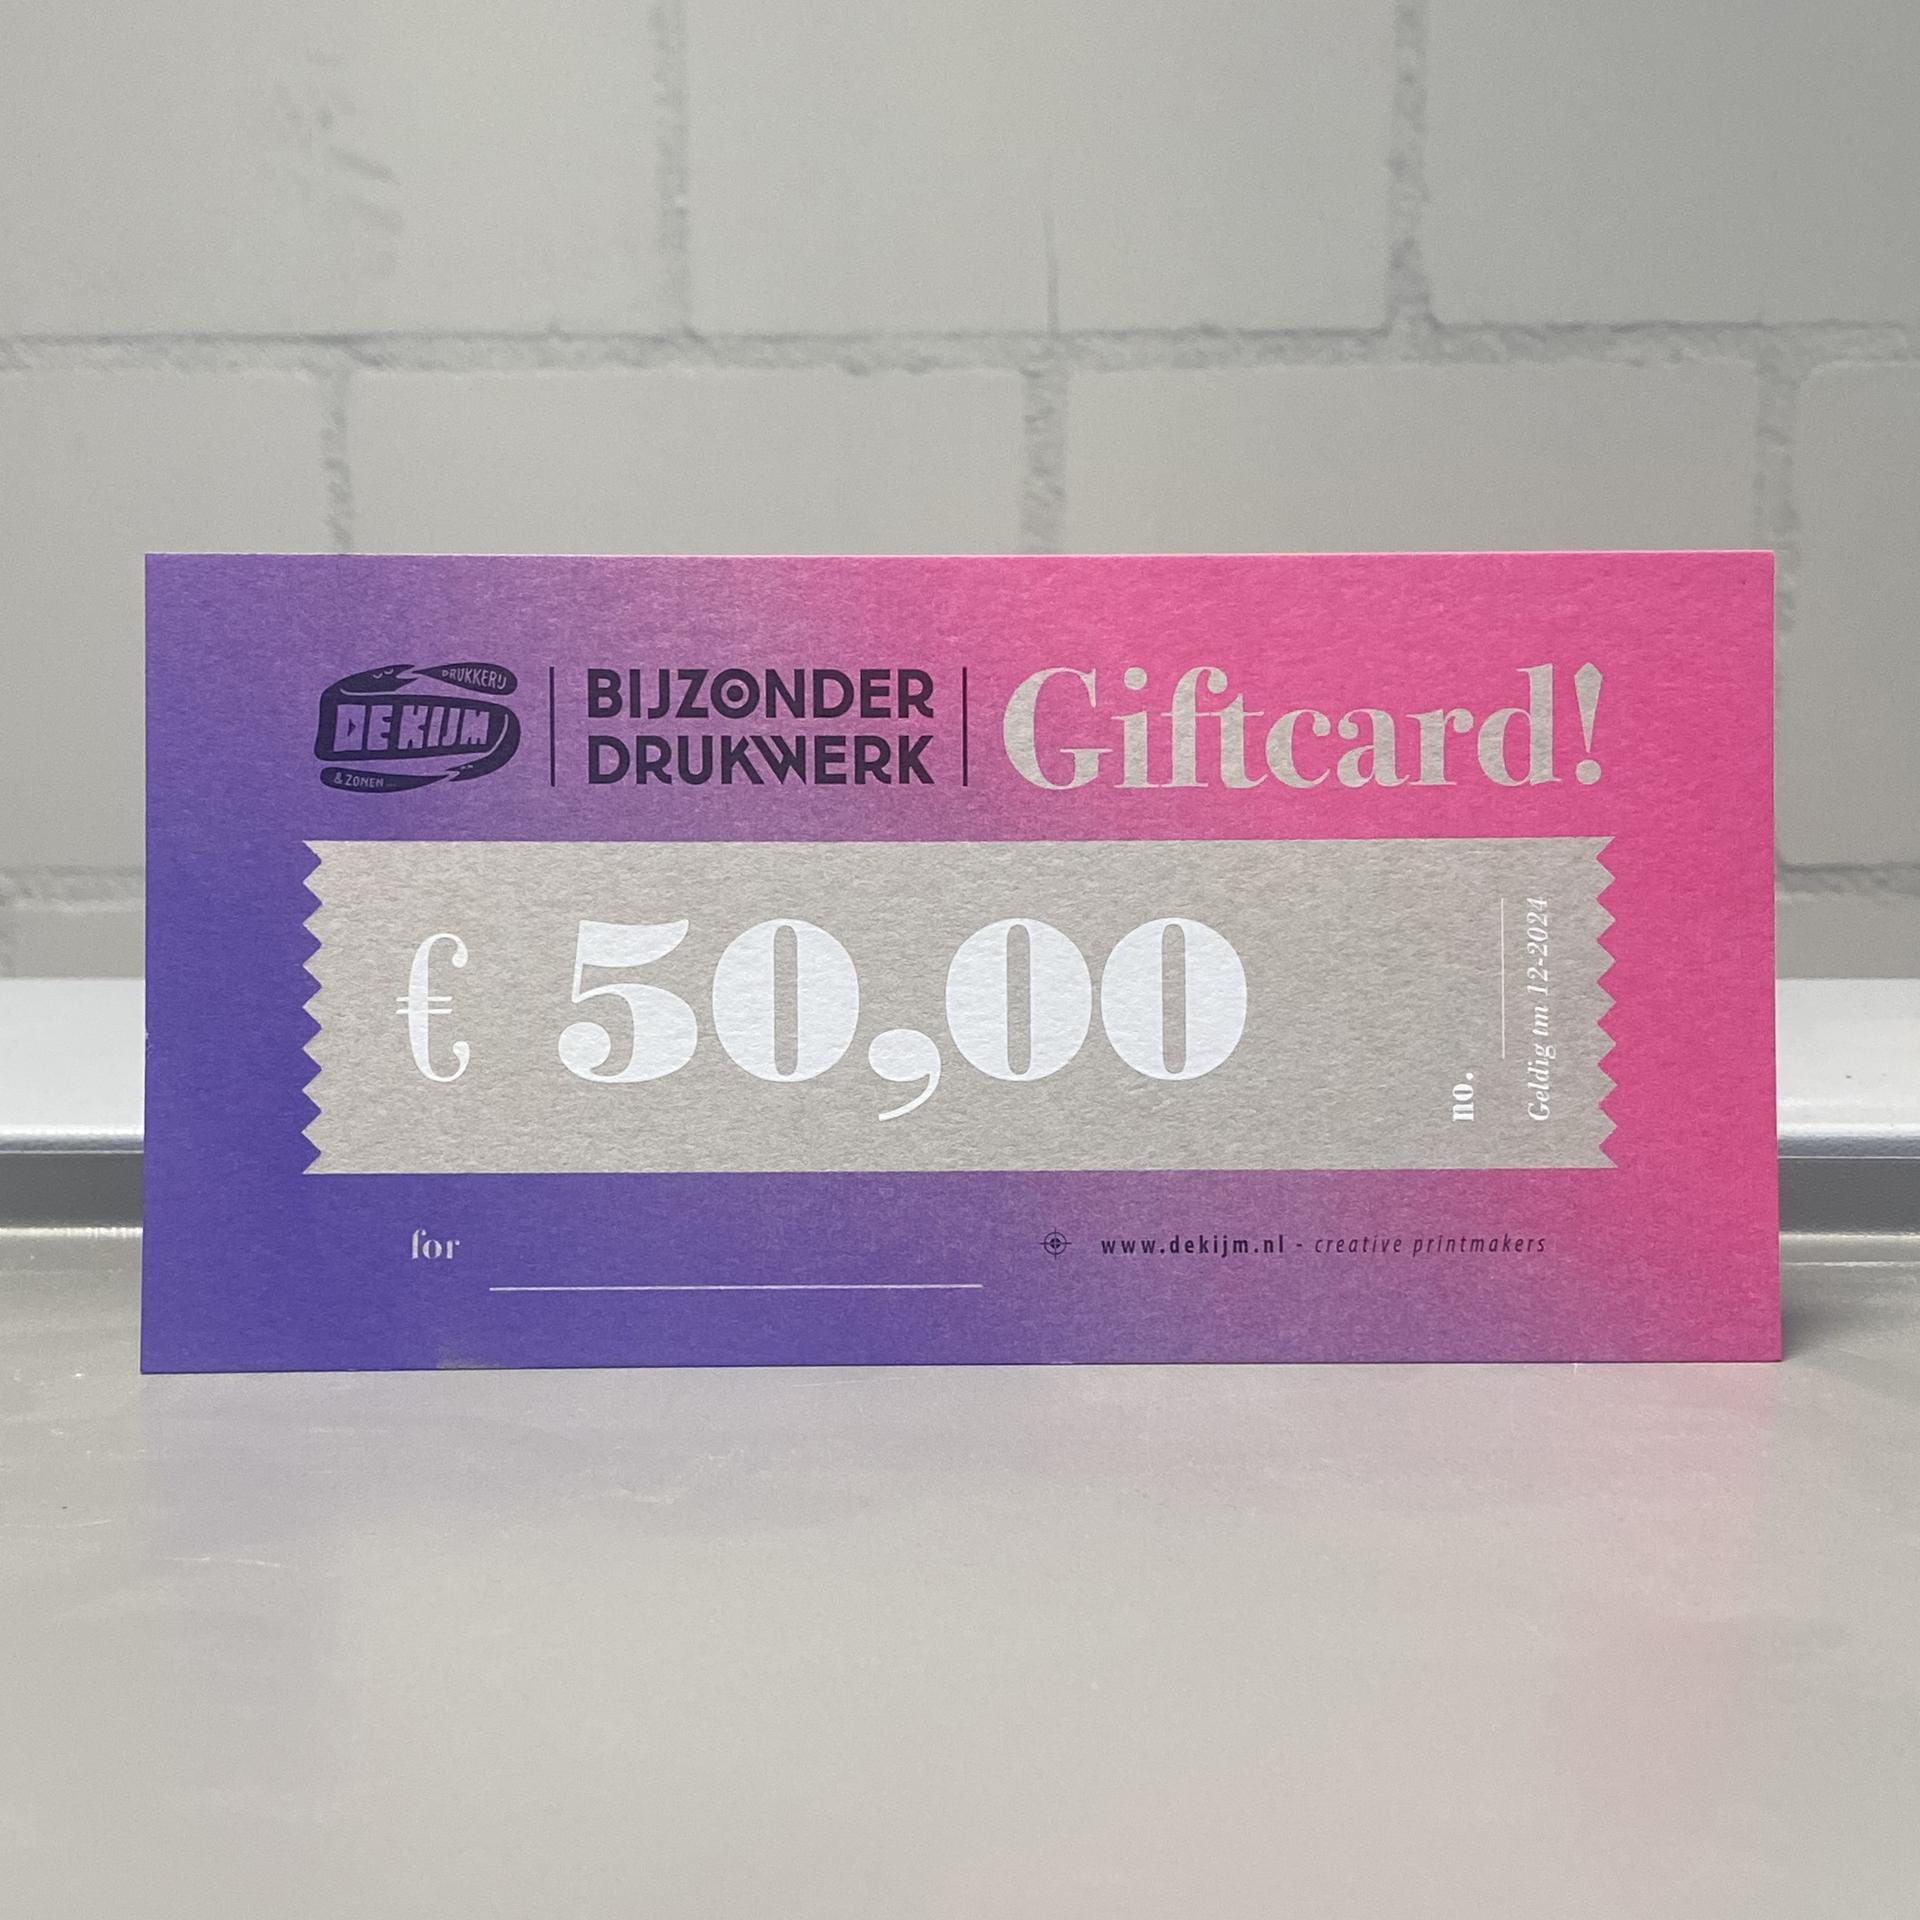 Giftcard € 50,00